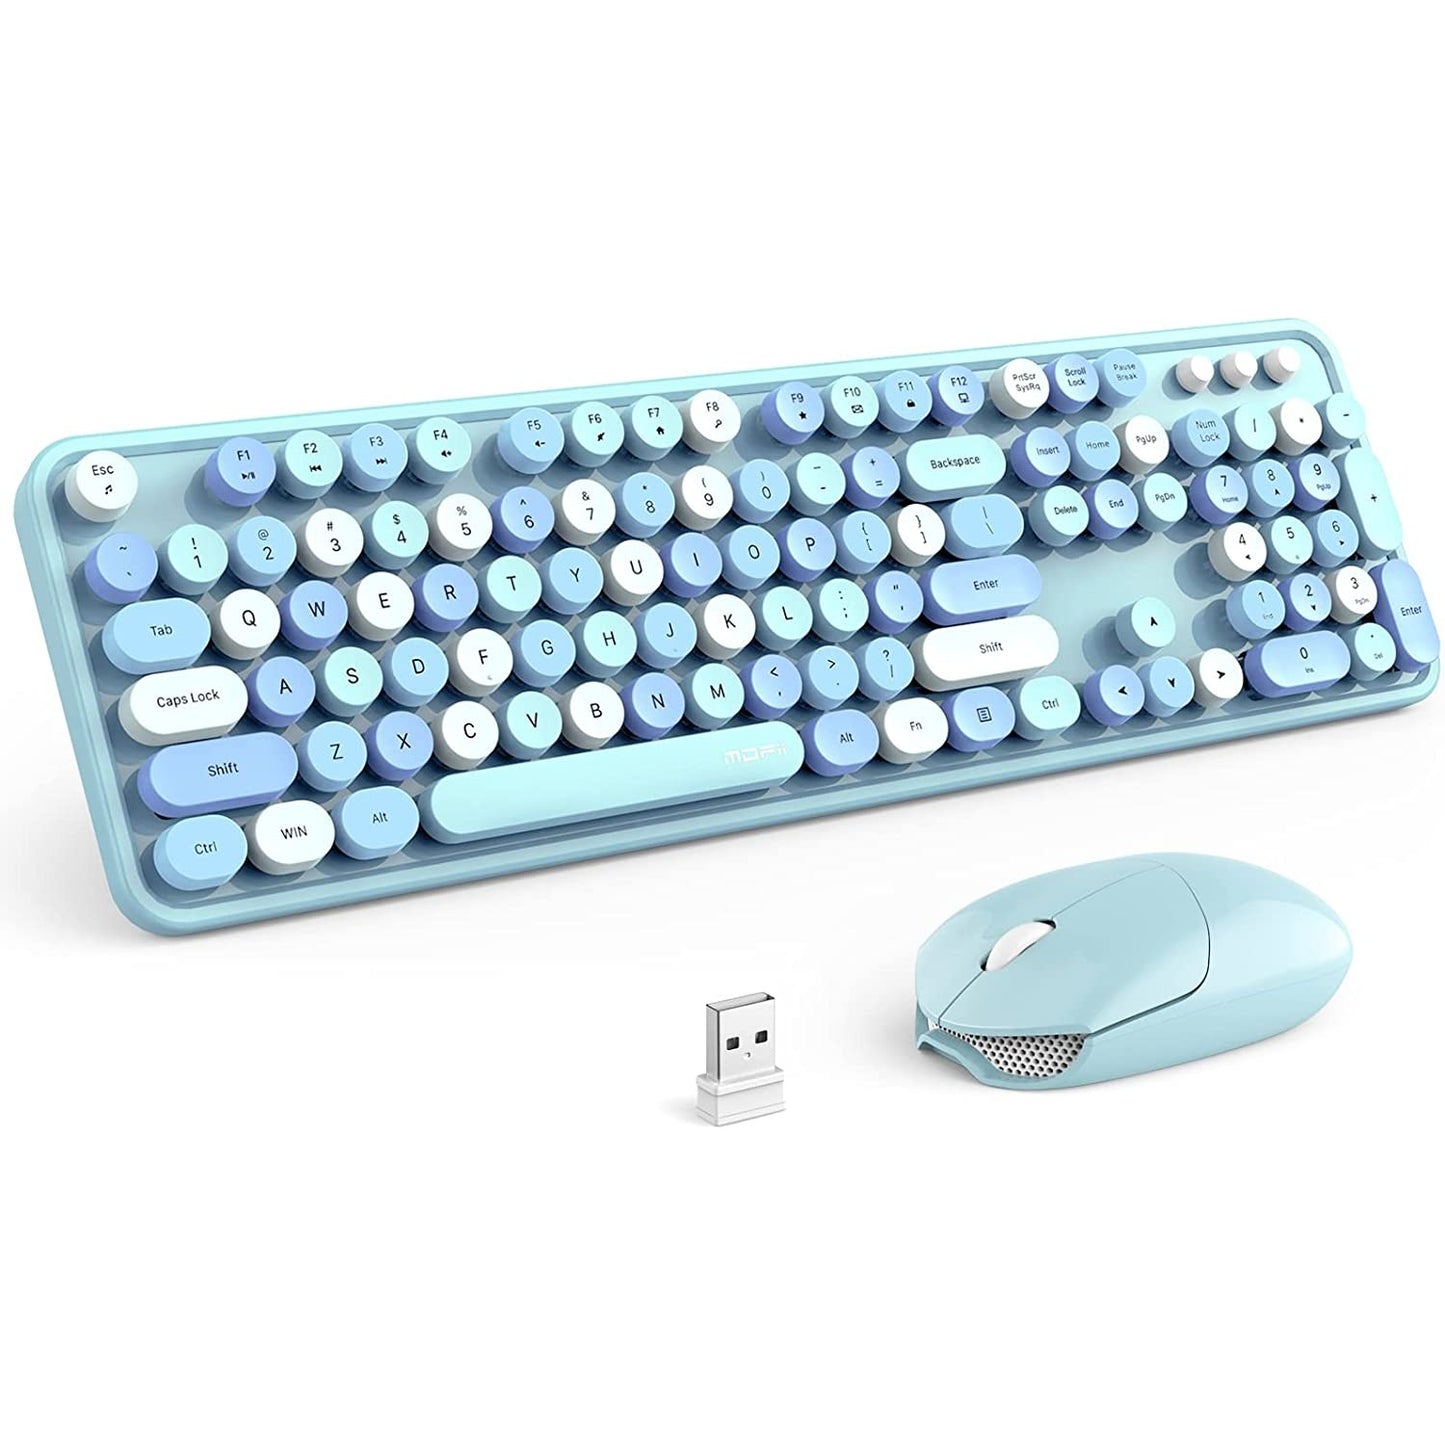 A blue and white colored retro style wireless keyboard and mouse.